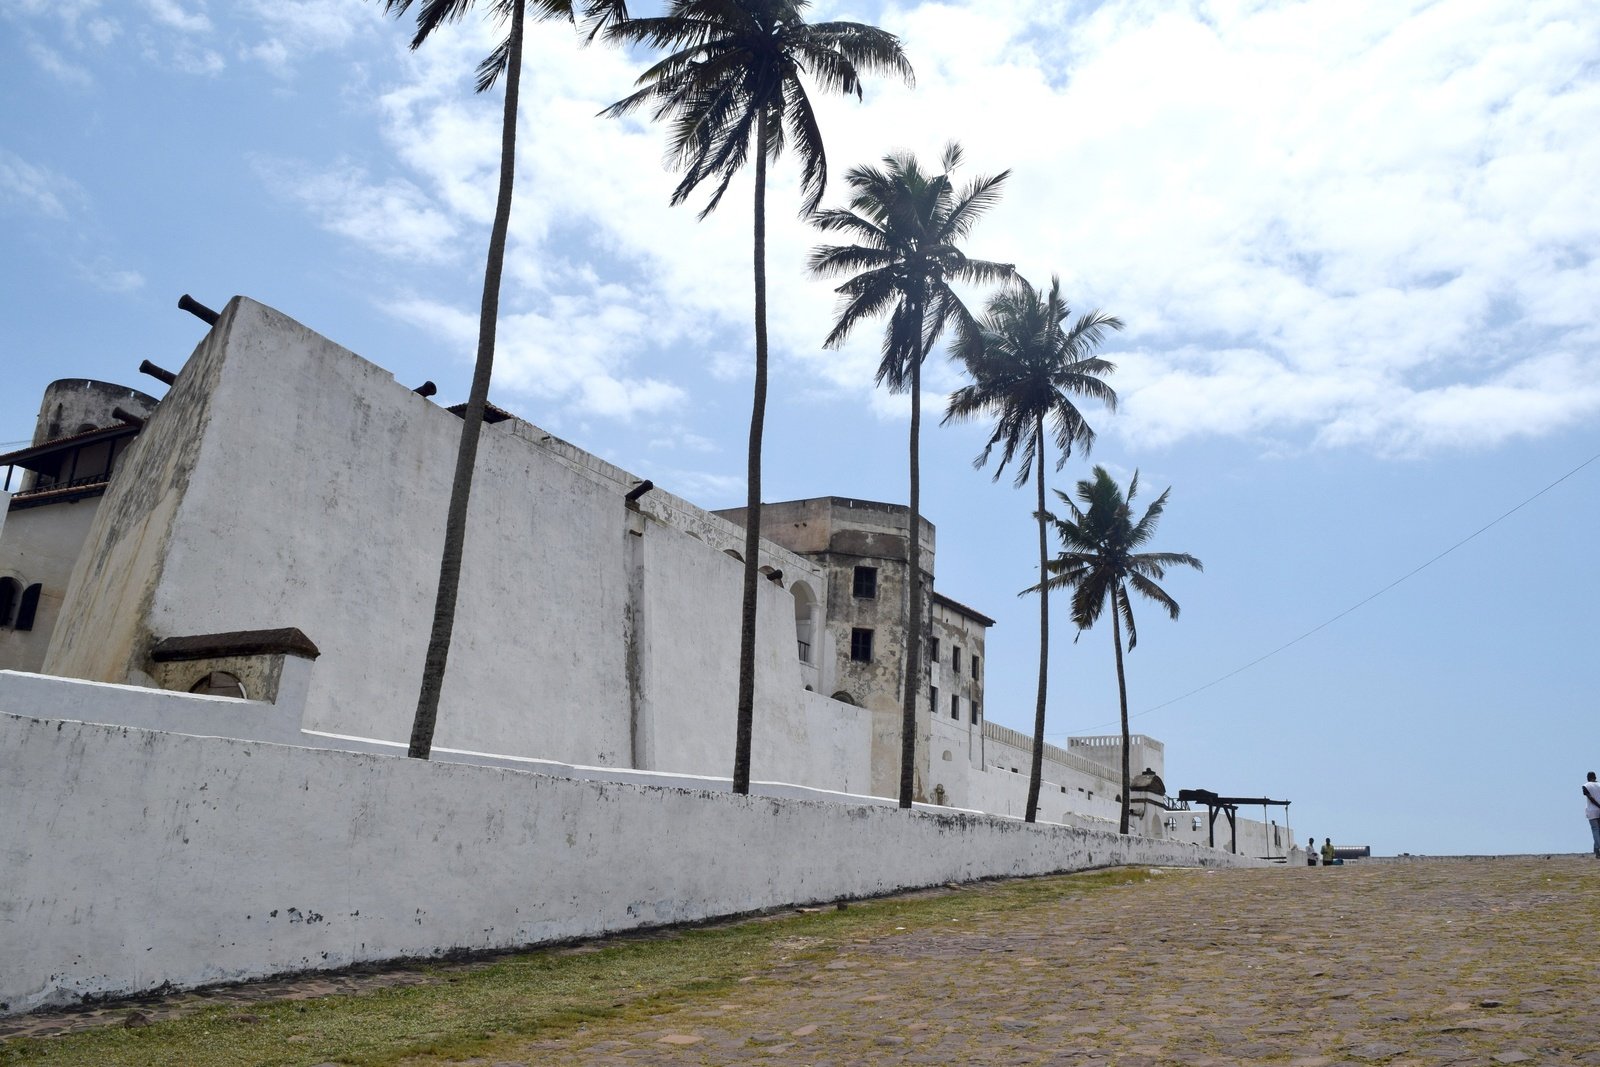 Ghana has several forts and castles to explore, they echo the past of the country's history.